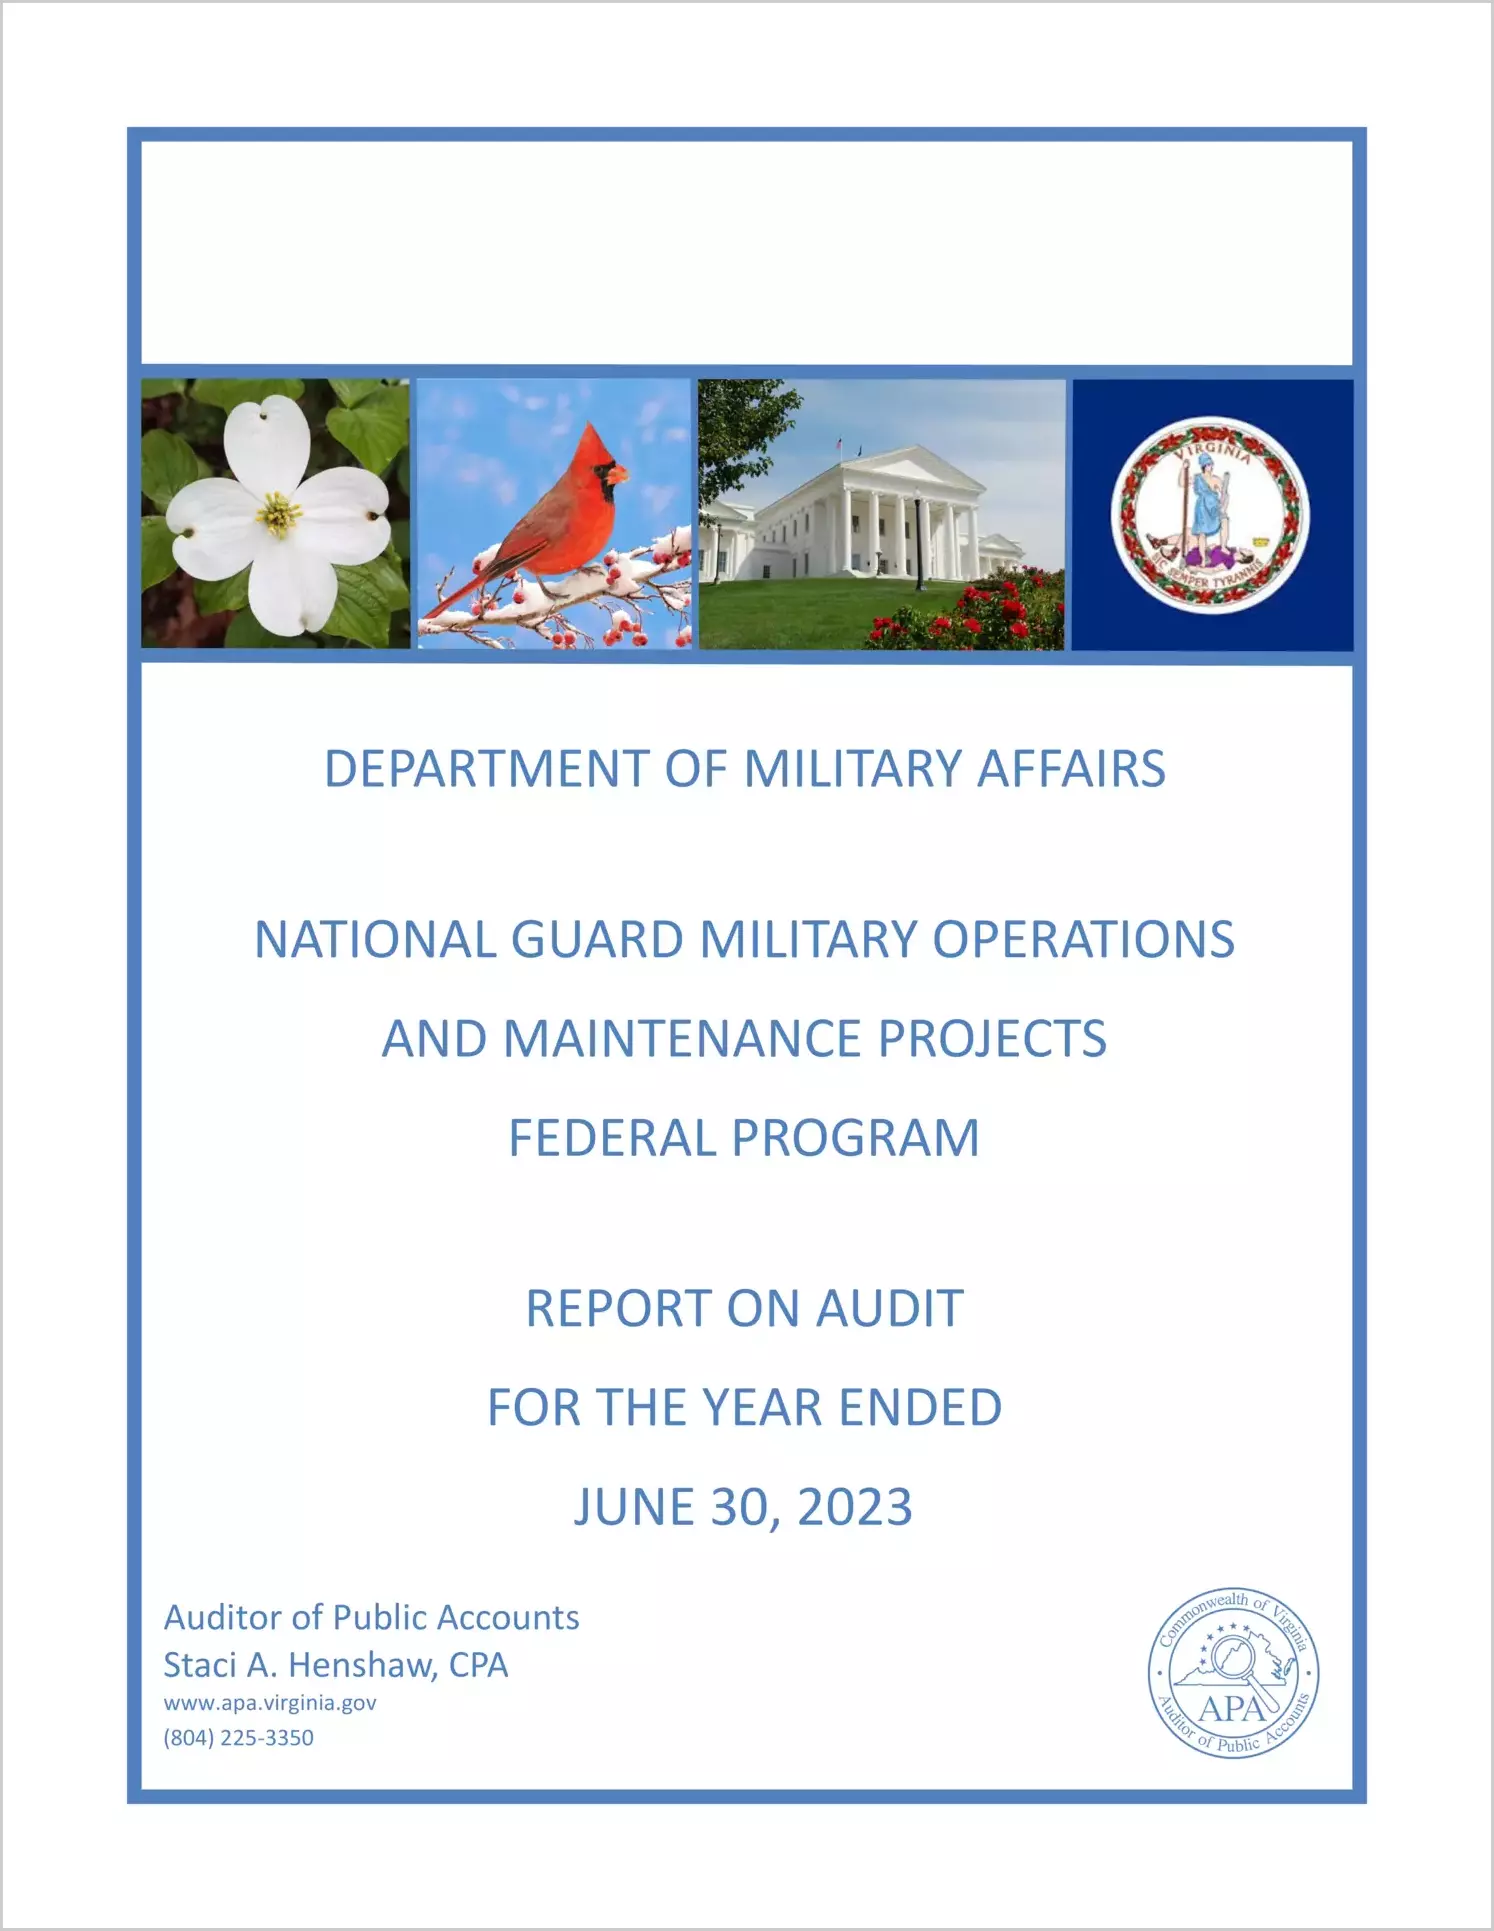 Department of Military Affairs National Guard Military Operations and Maintenance Projects Federal Program for the year ended June 30, 2023